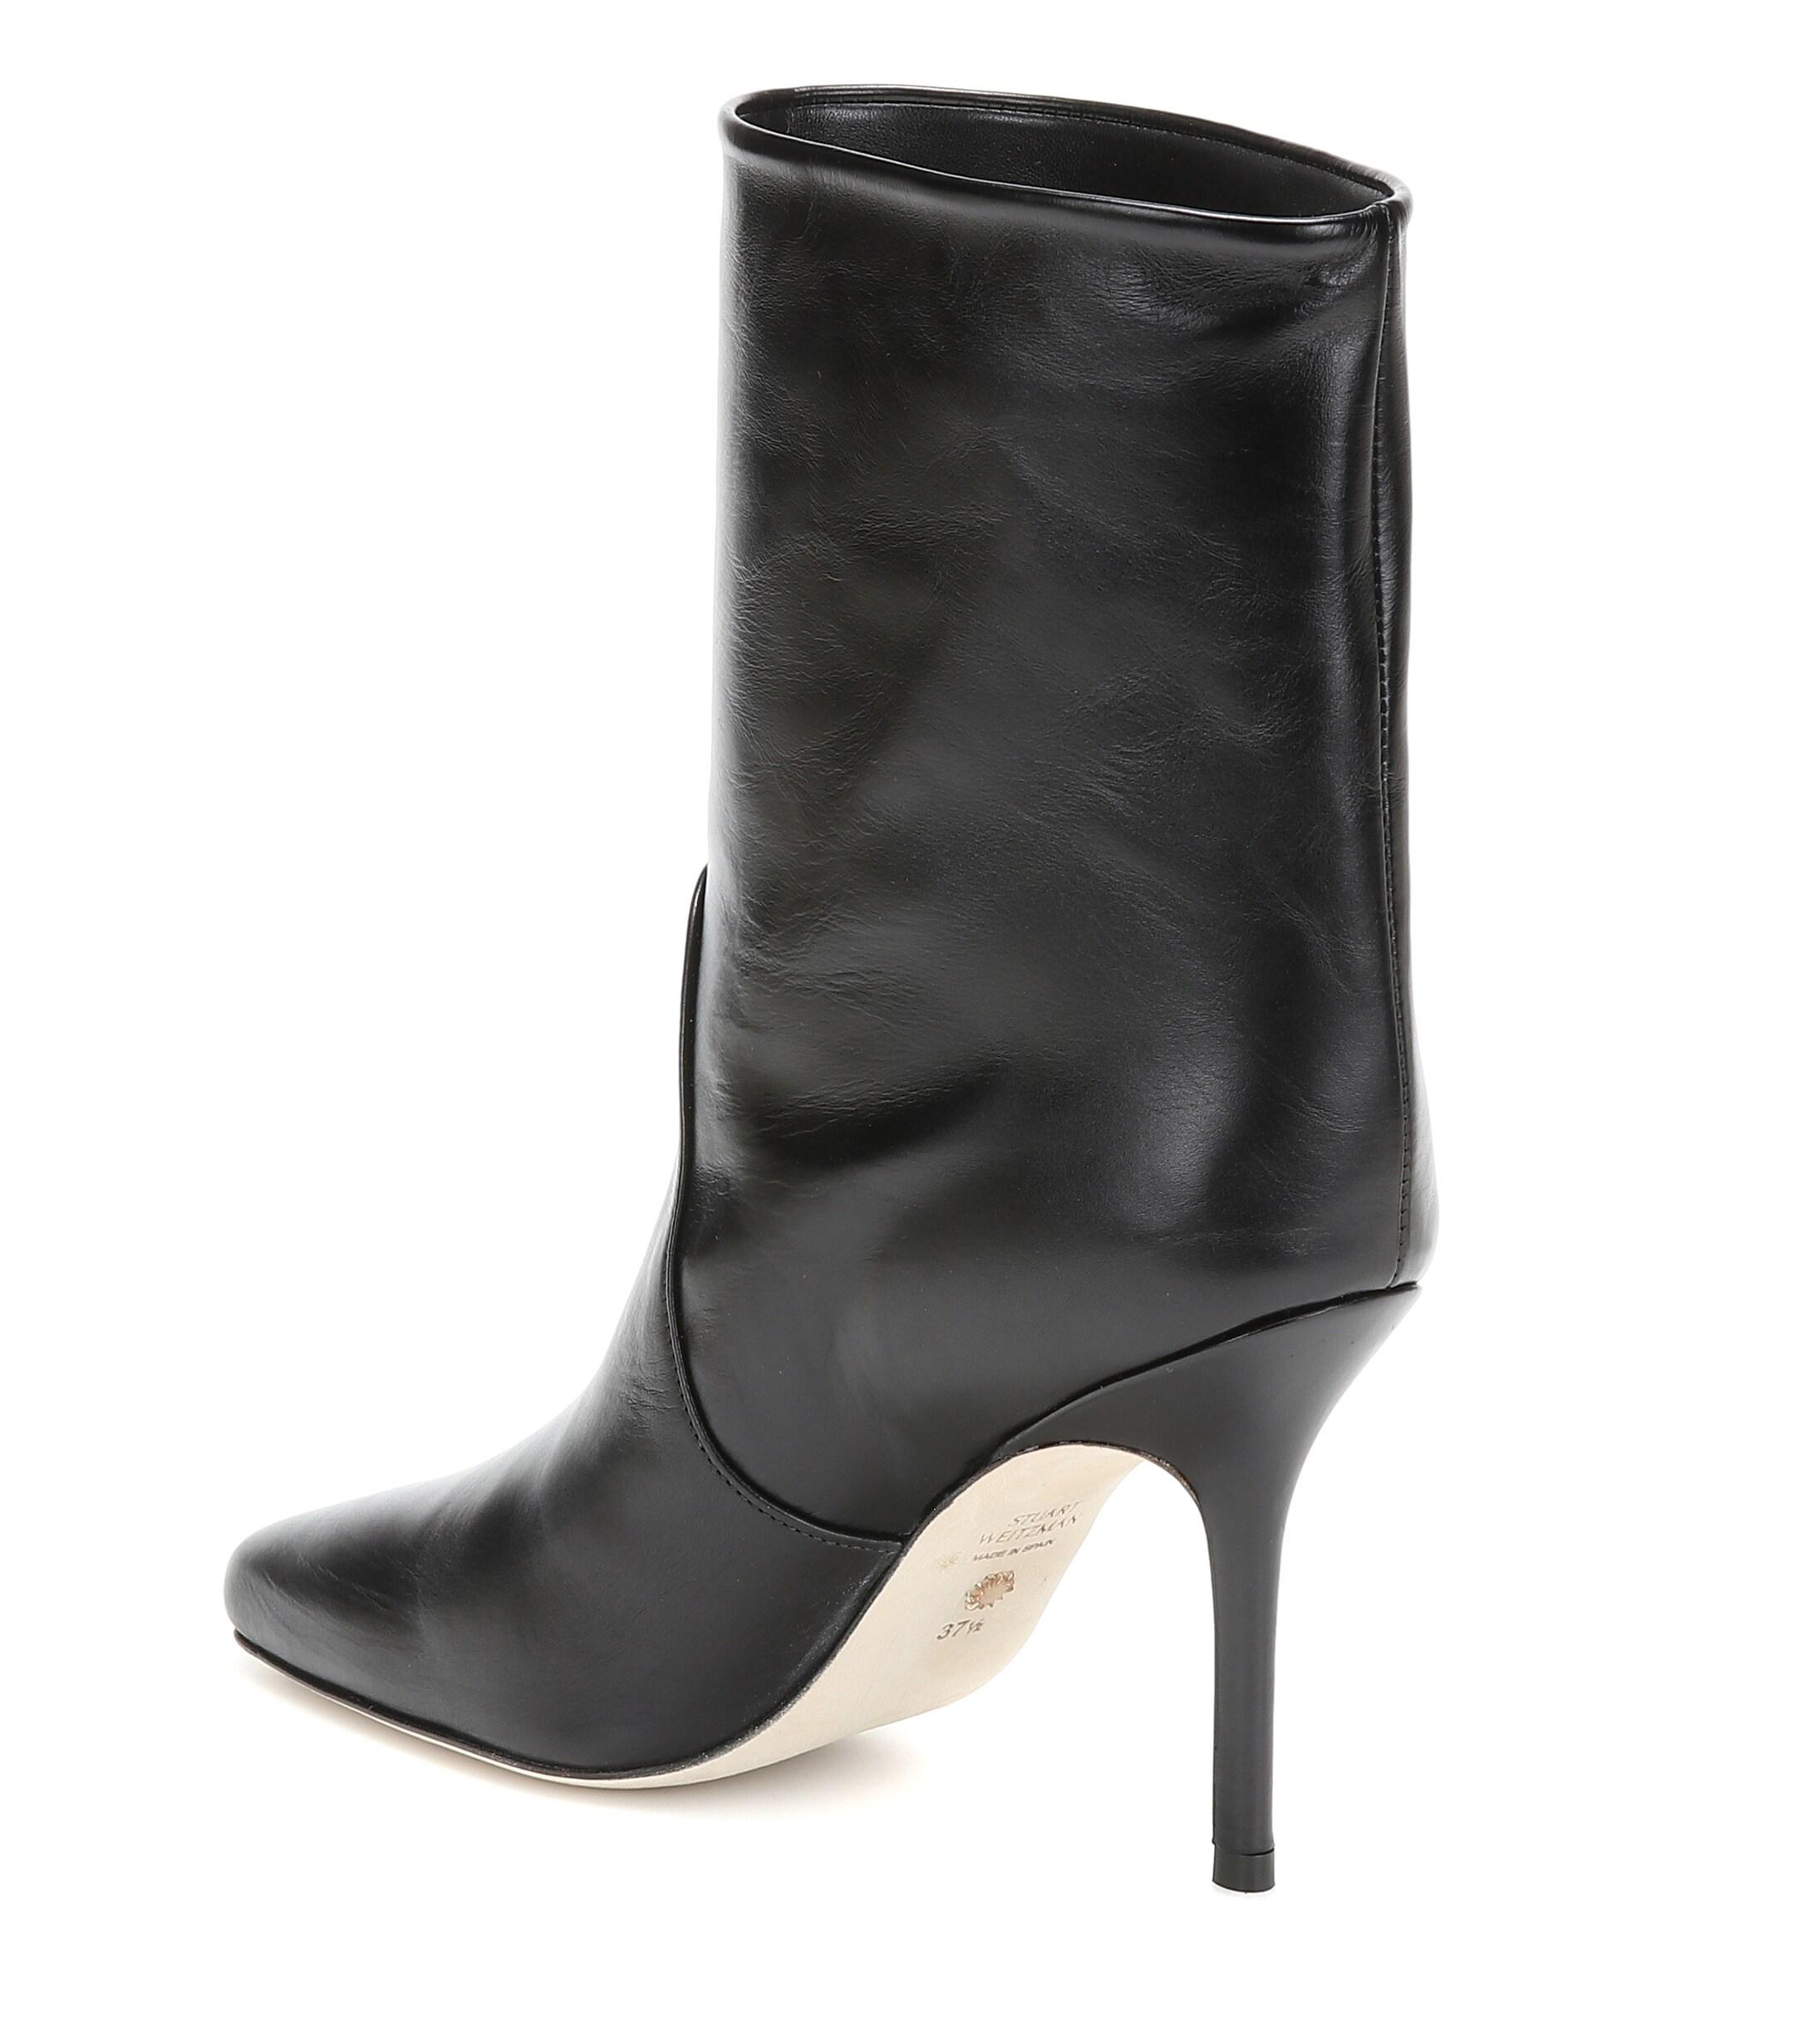 Stuart Weitzman Ebb Leather Ankle Boots in Black - Lyst